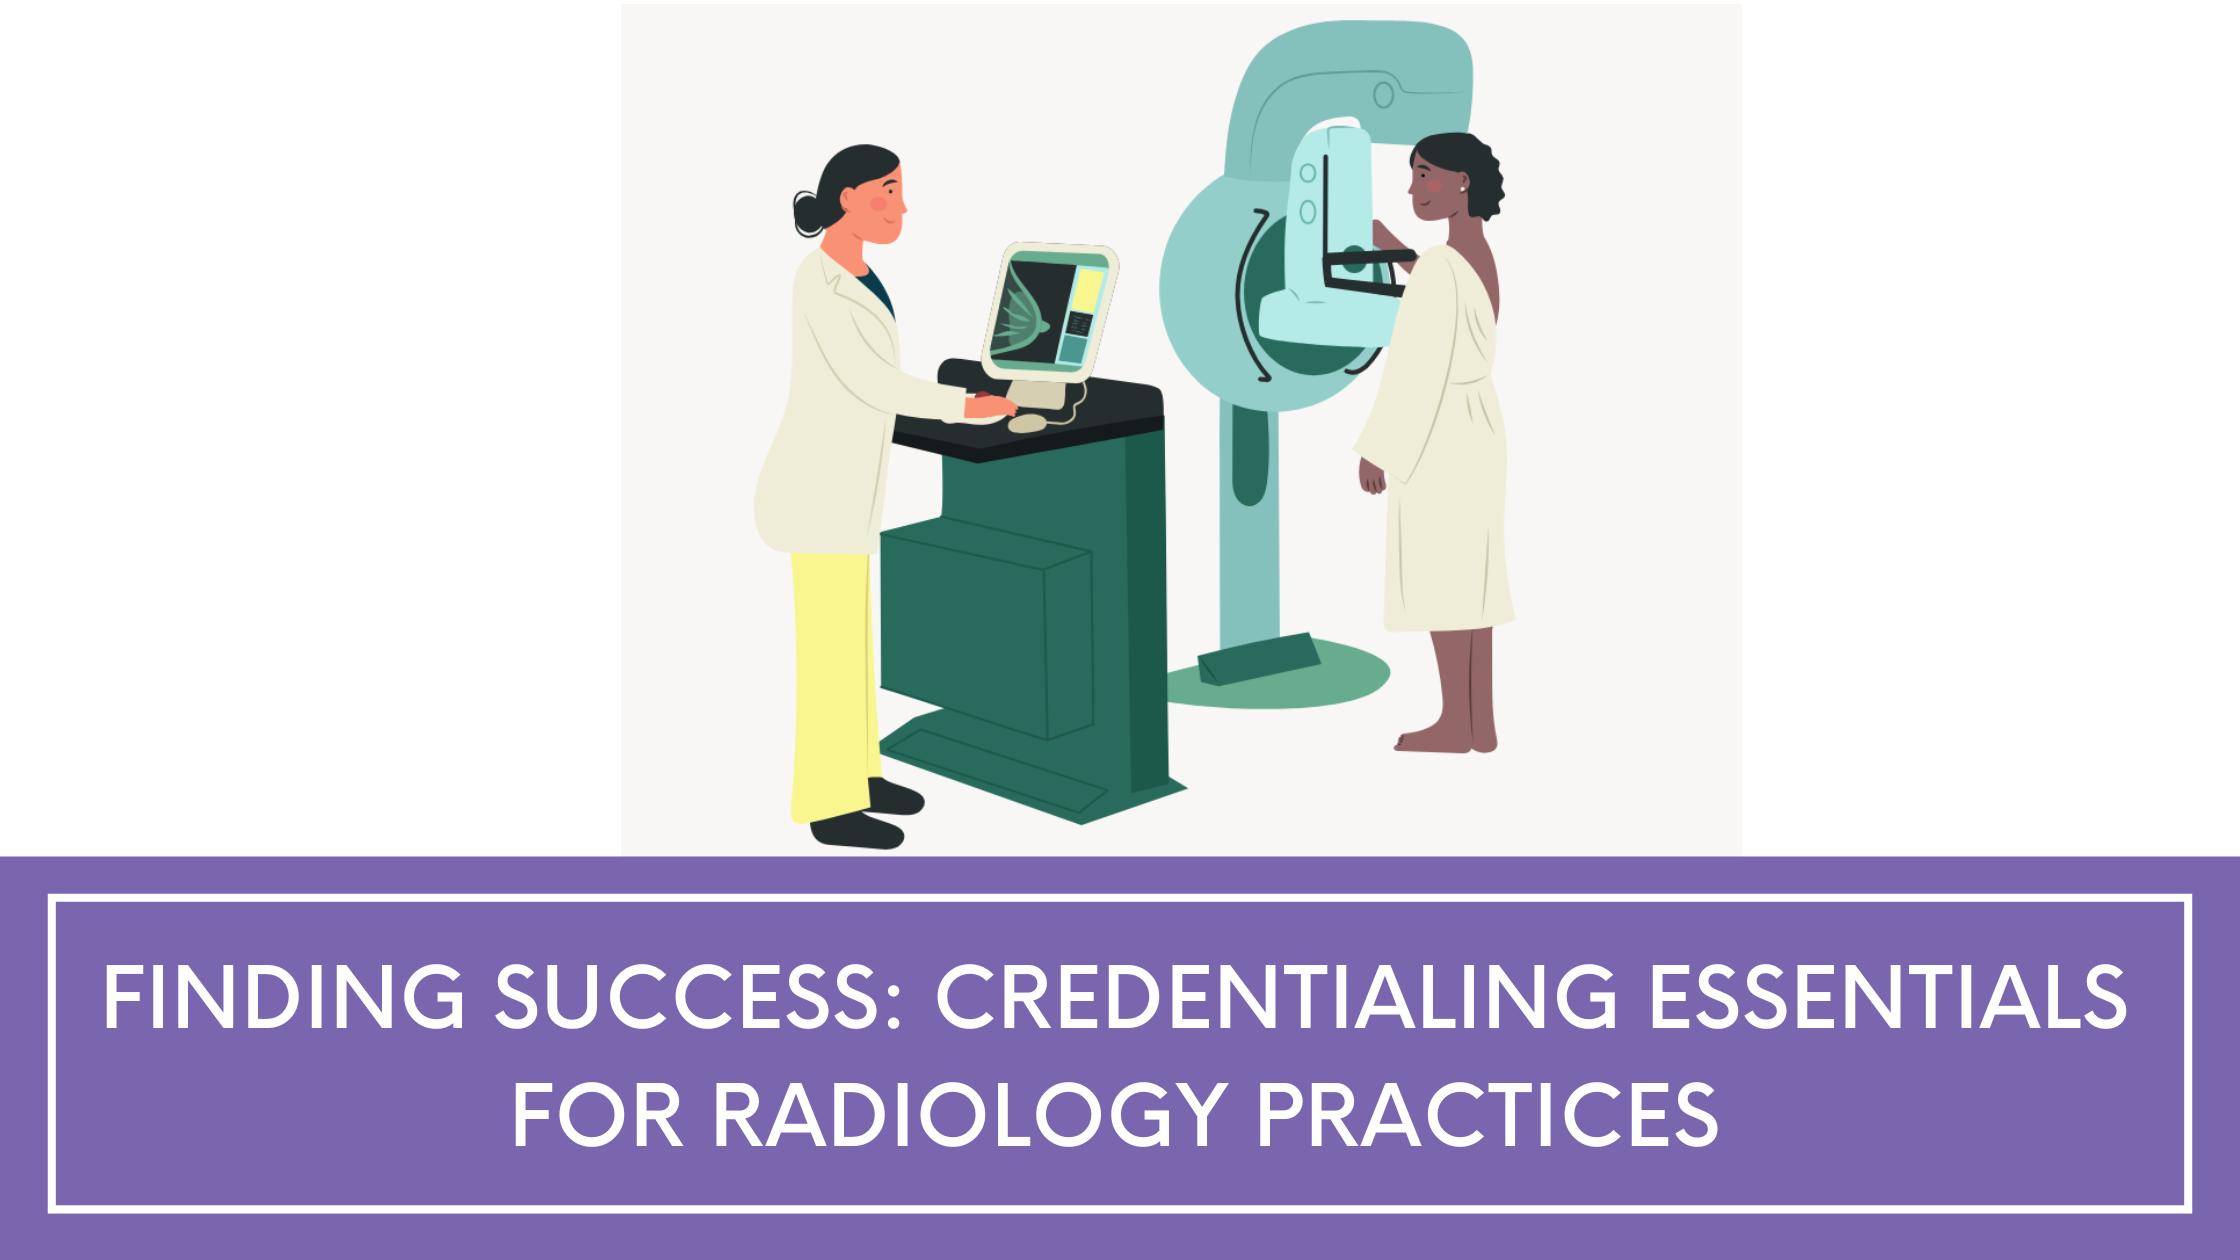 Credentialing Essentials for Radiology Practices